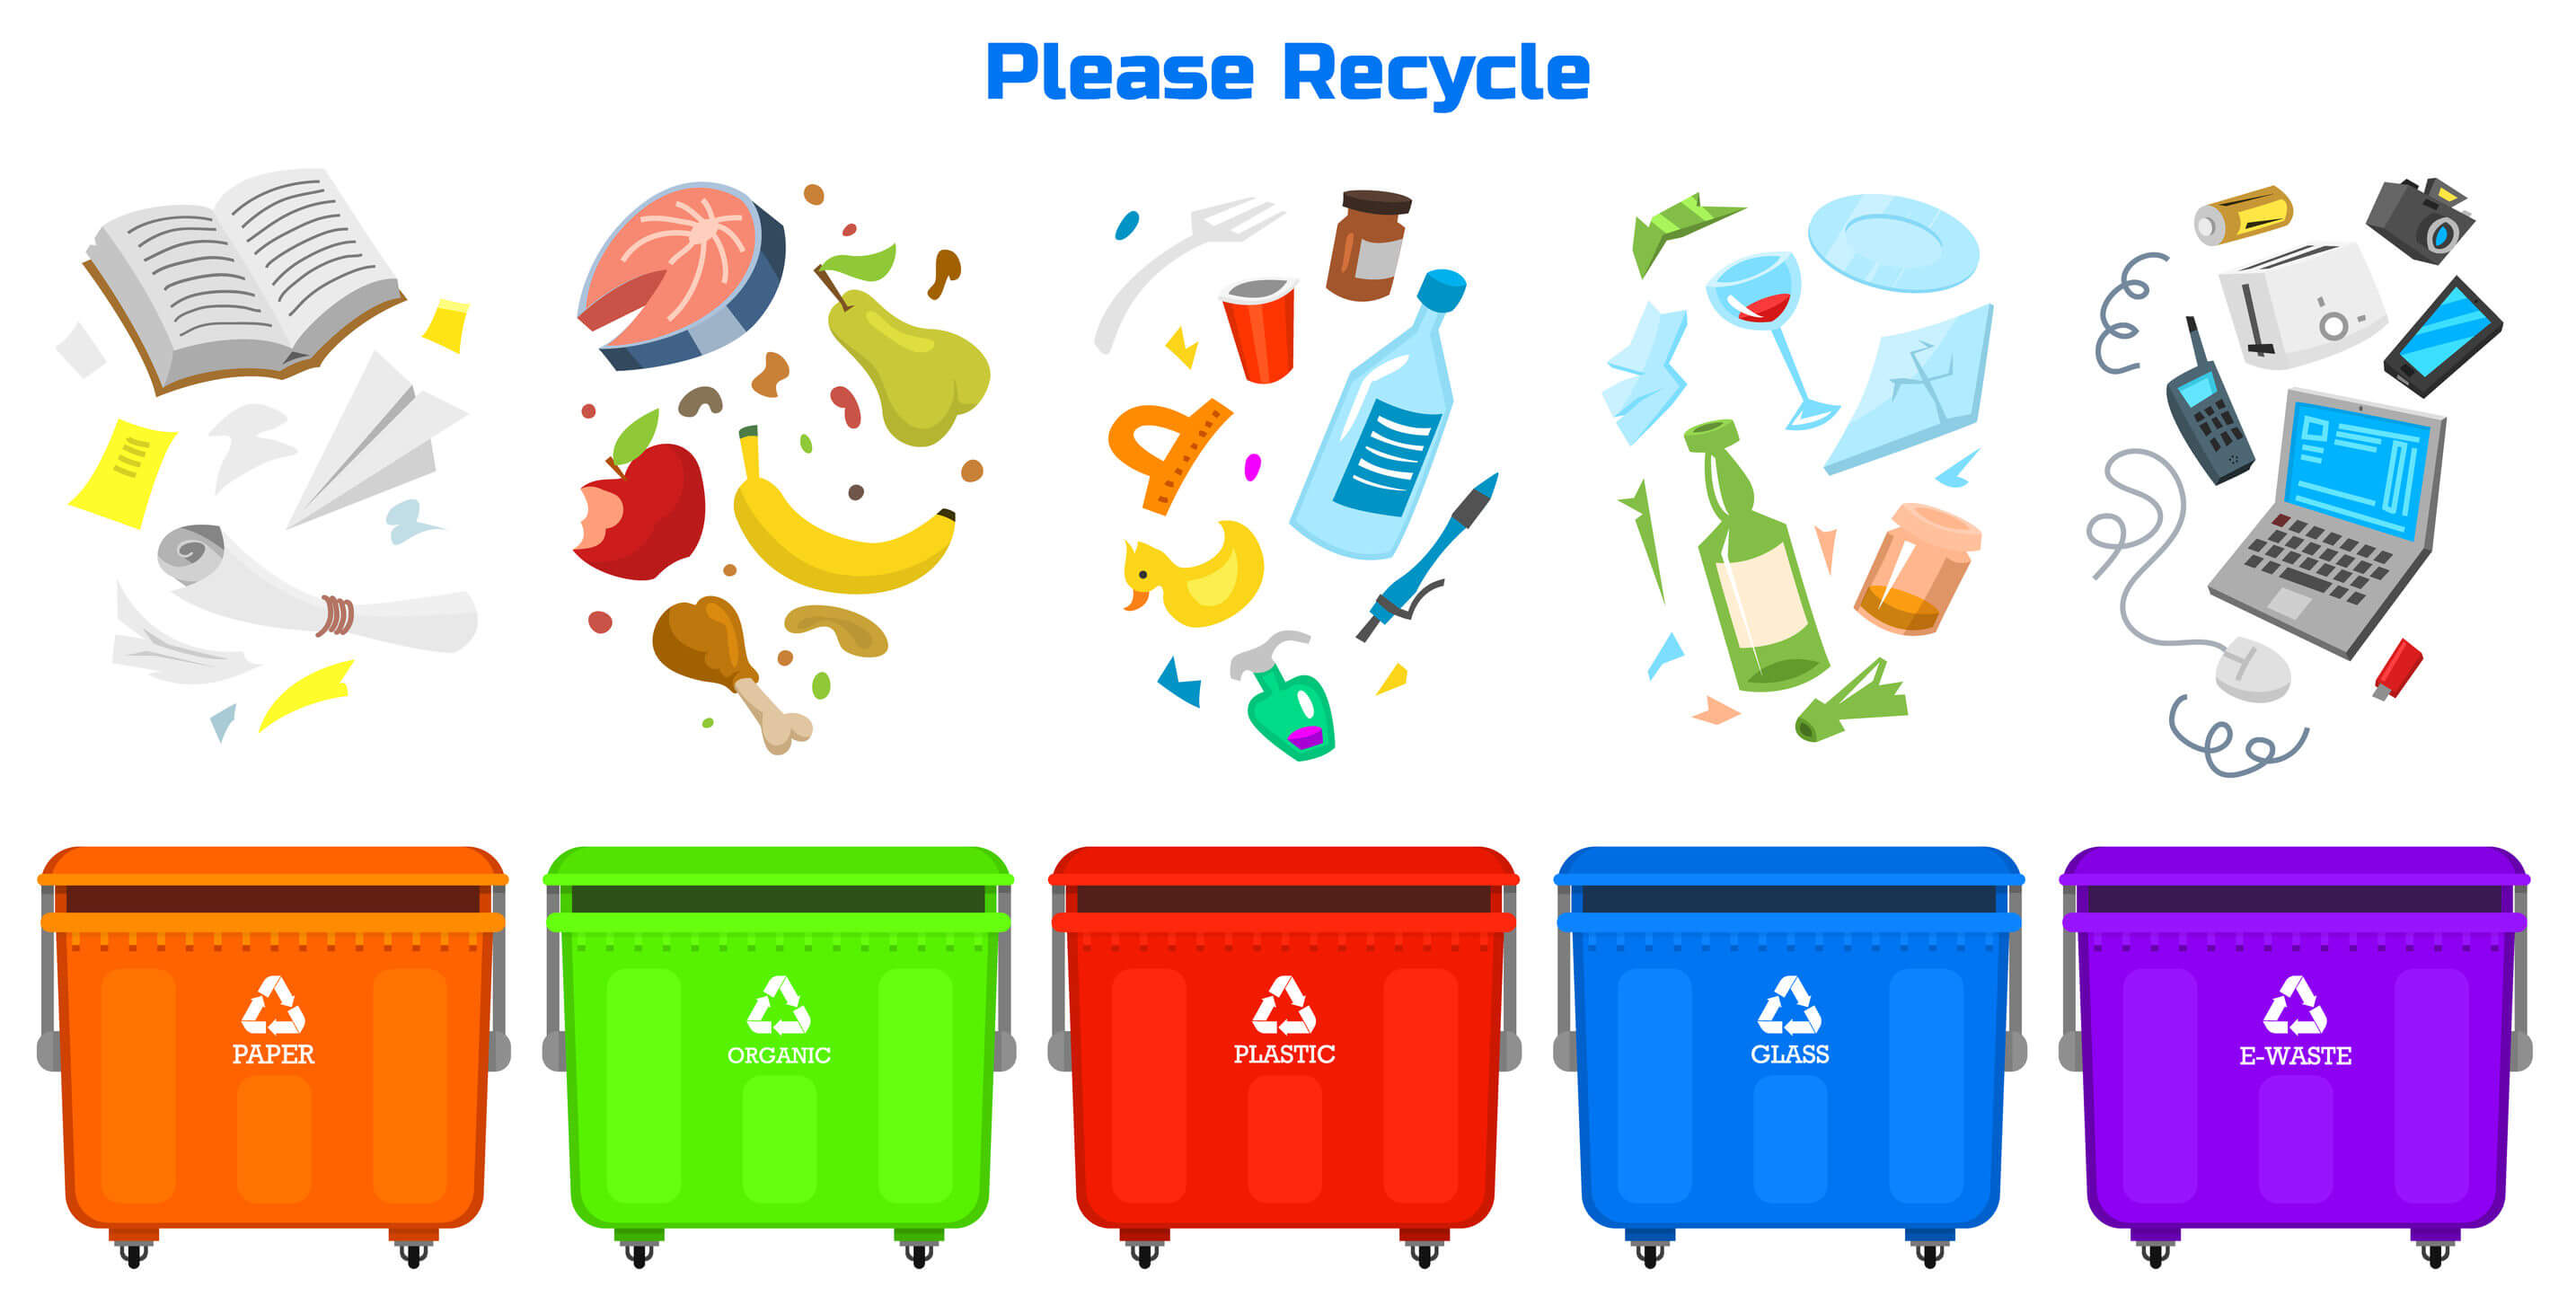 Commercial Waste Management Ideas | Infographic